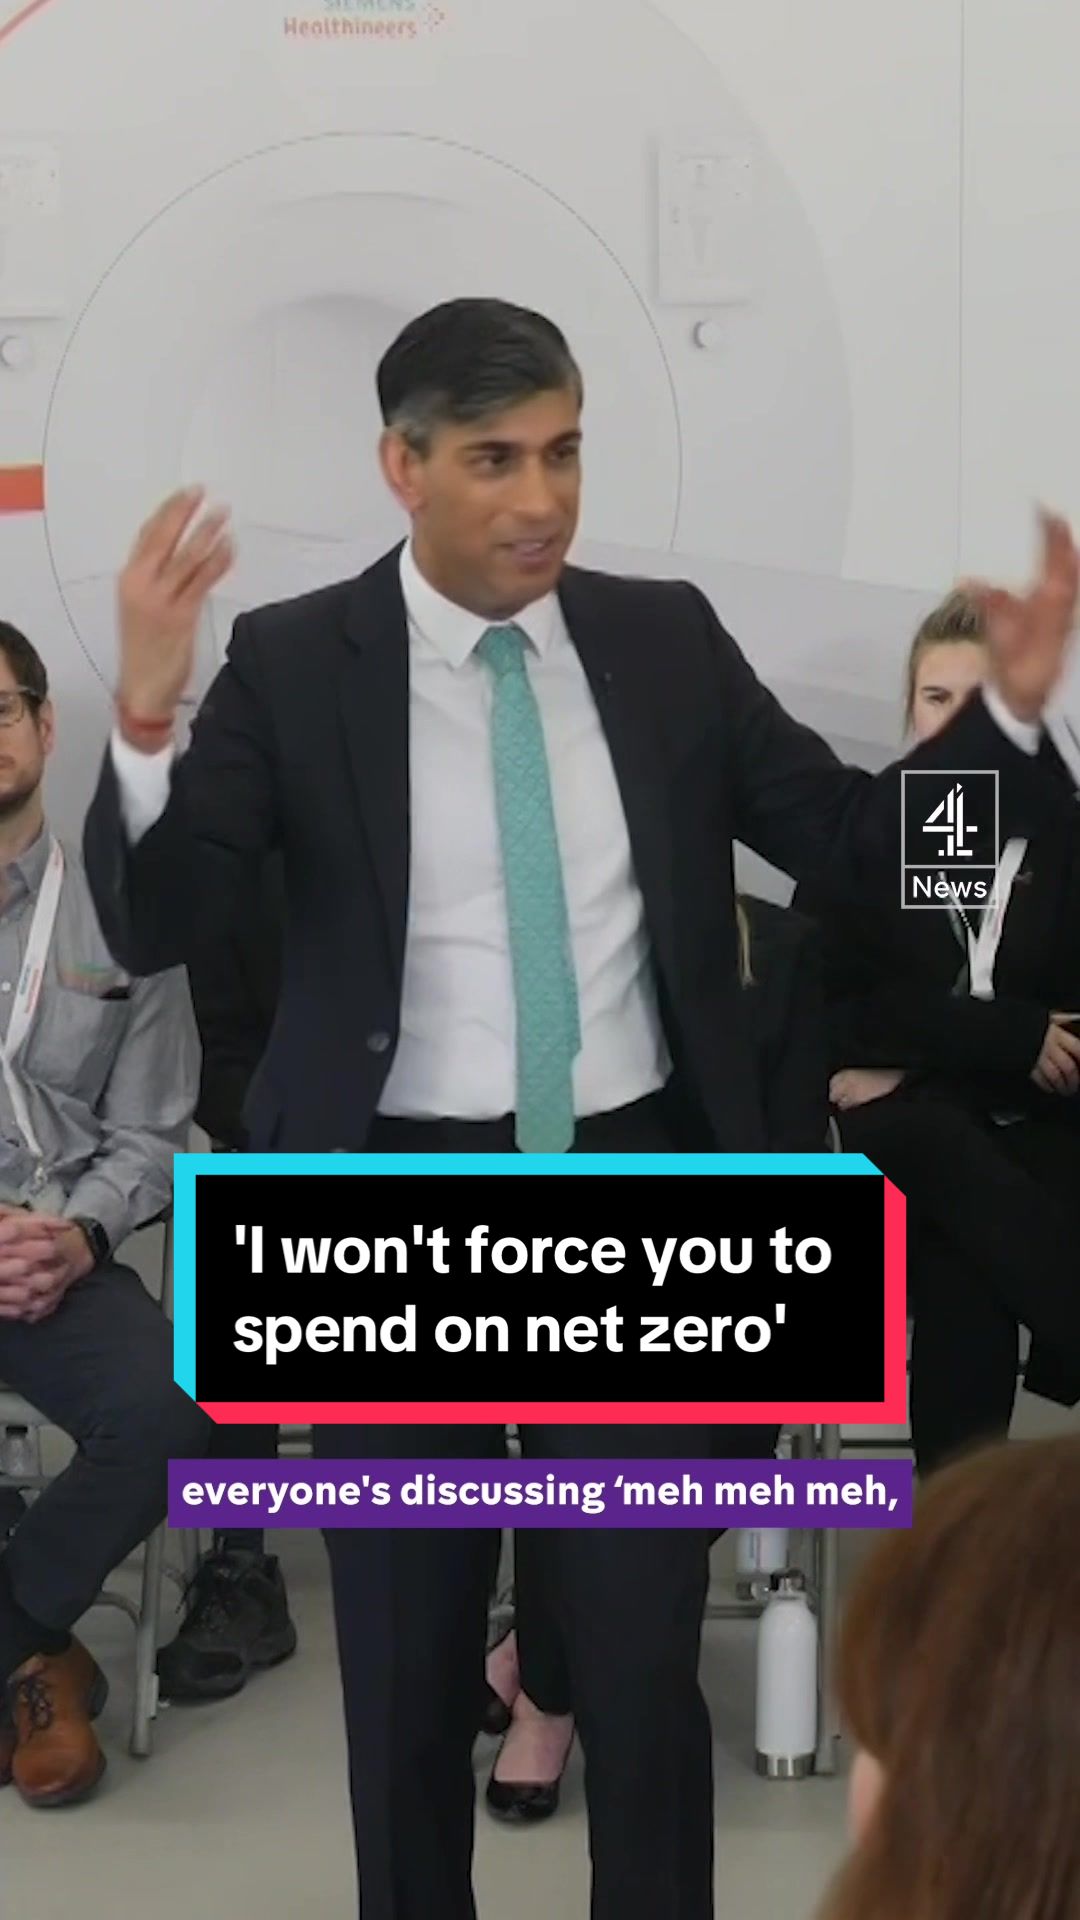 Rishi Sunak defends his record on net zero, saying people shouldn't be forced to spend "£5,000, £10,000, £15,000 prematurely ripping out stuff, changing things, changing cars and boilers." #NetZero #RishiSunak #UKPolitics #Tories #C4New